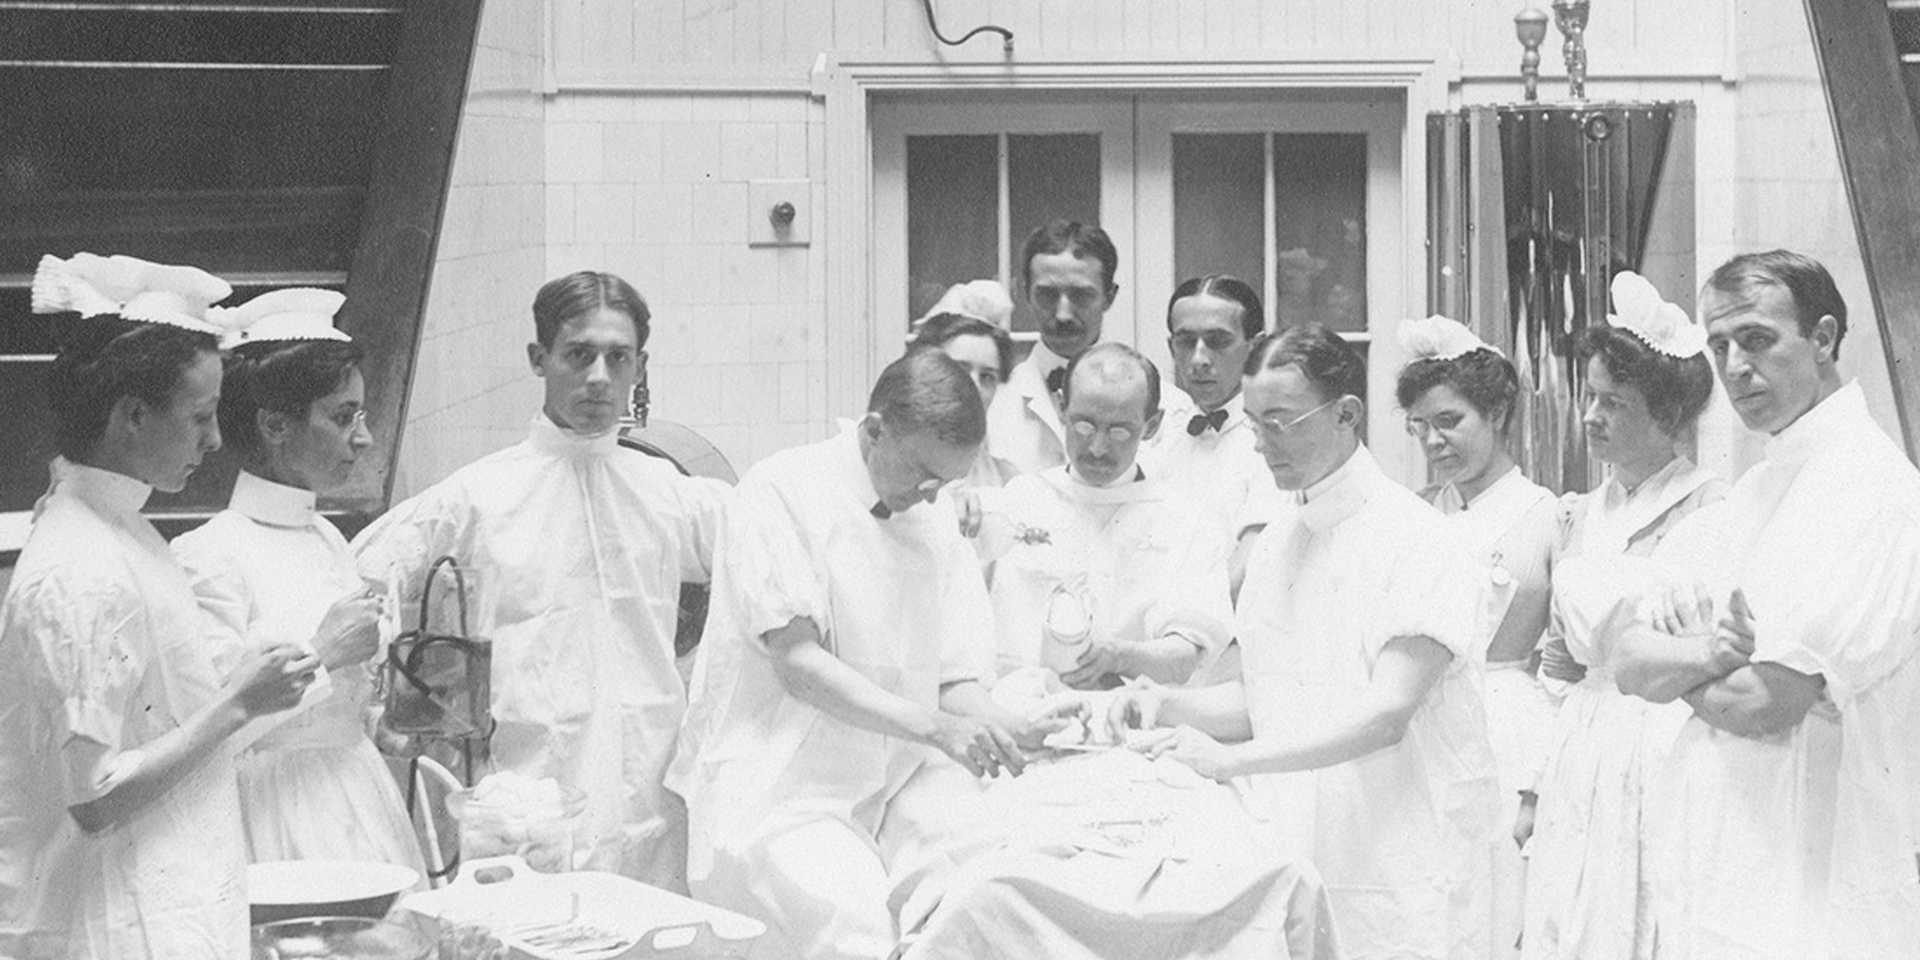 Black and white historical photo of doctors and nurses during operation